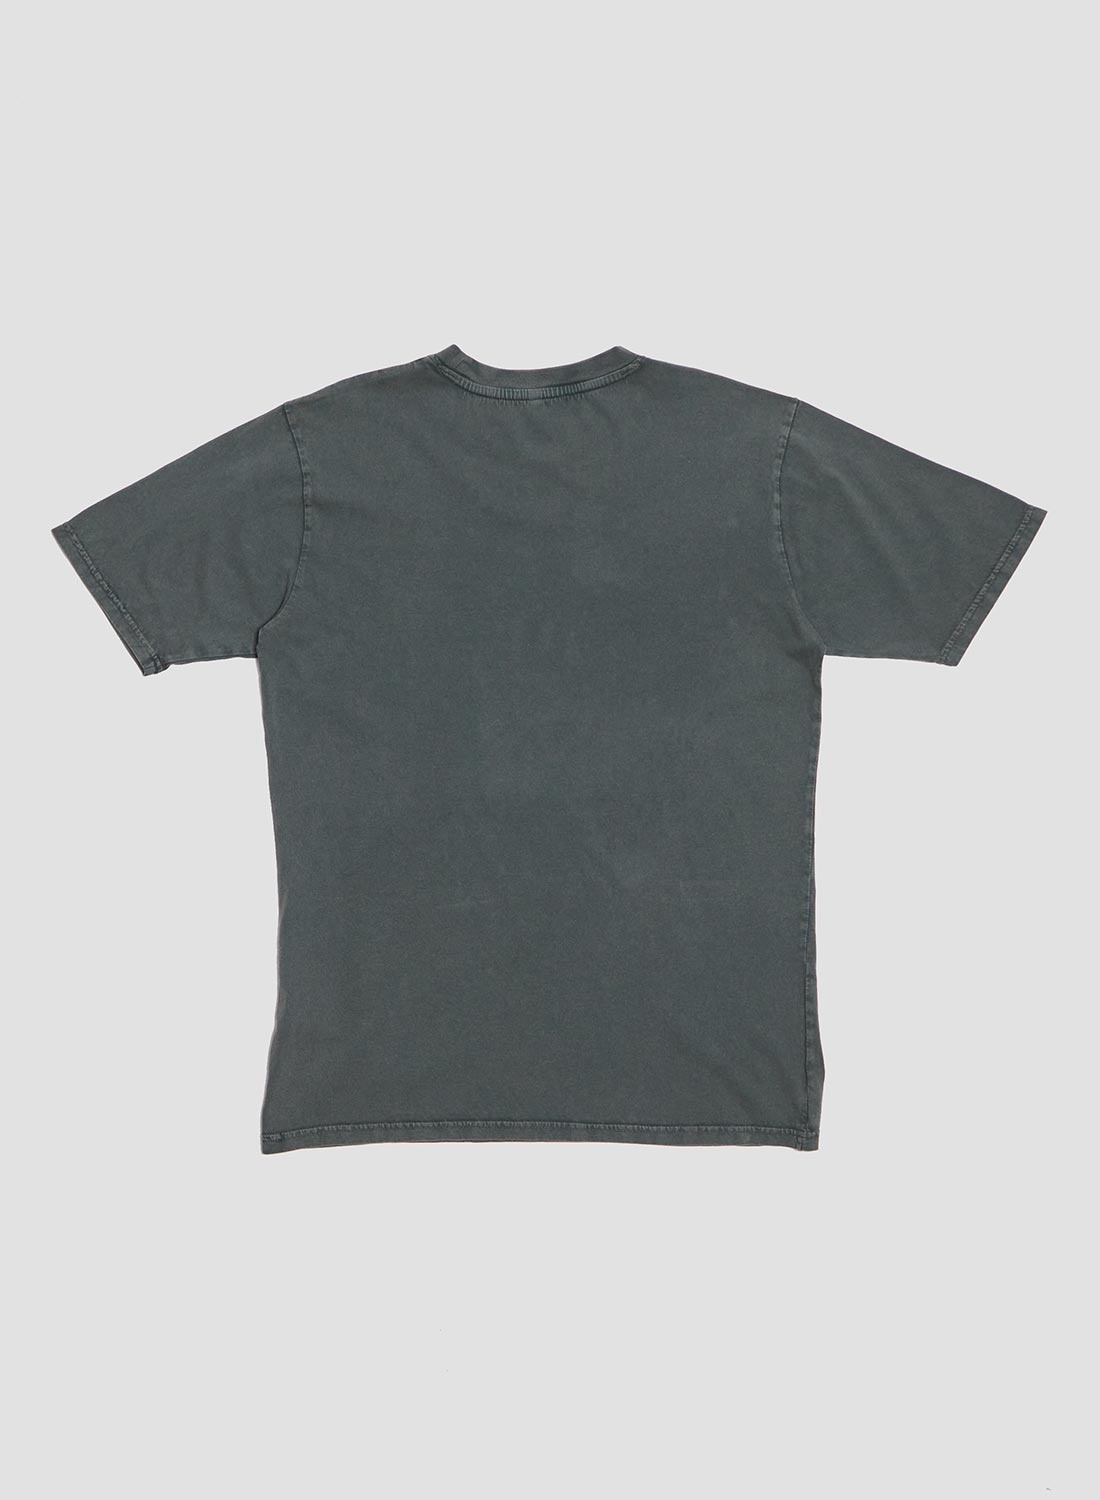 Classic Relaxed Fit Tee in Stone Wash Green - 6